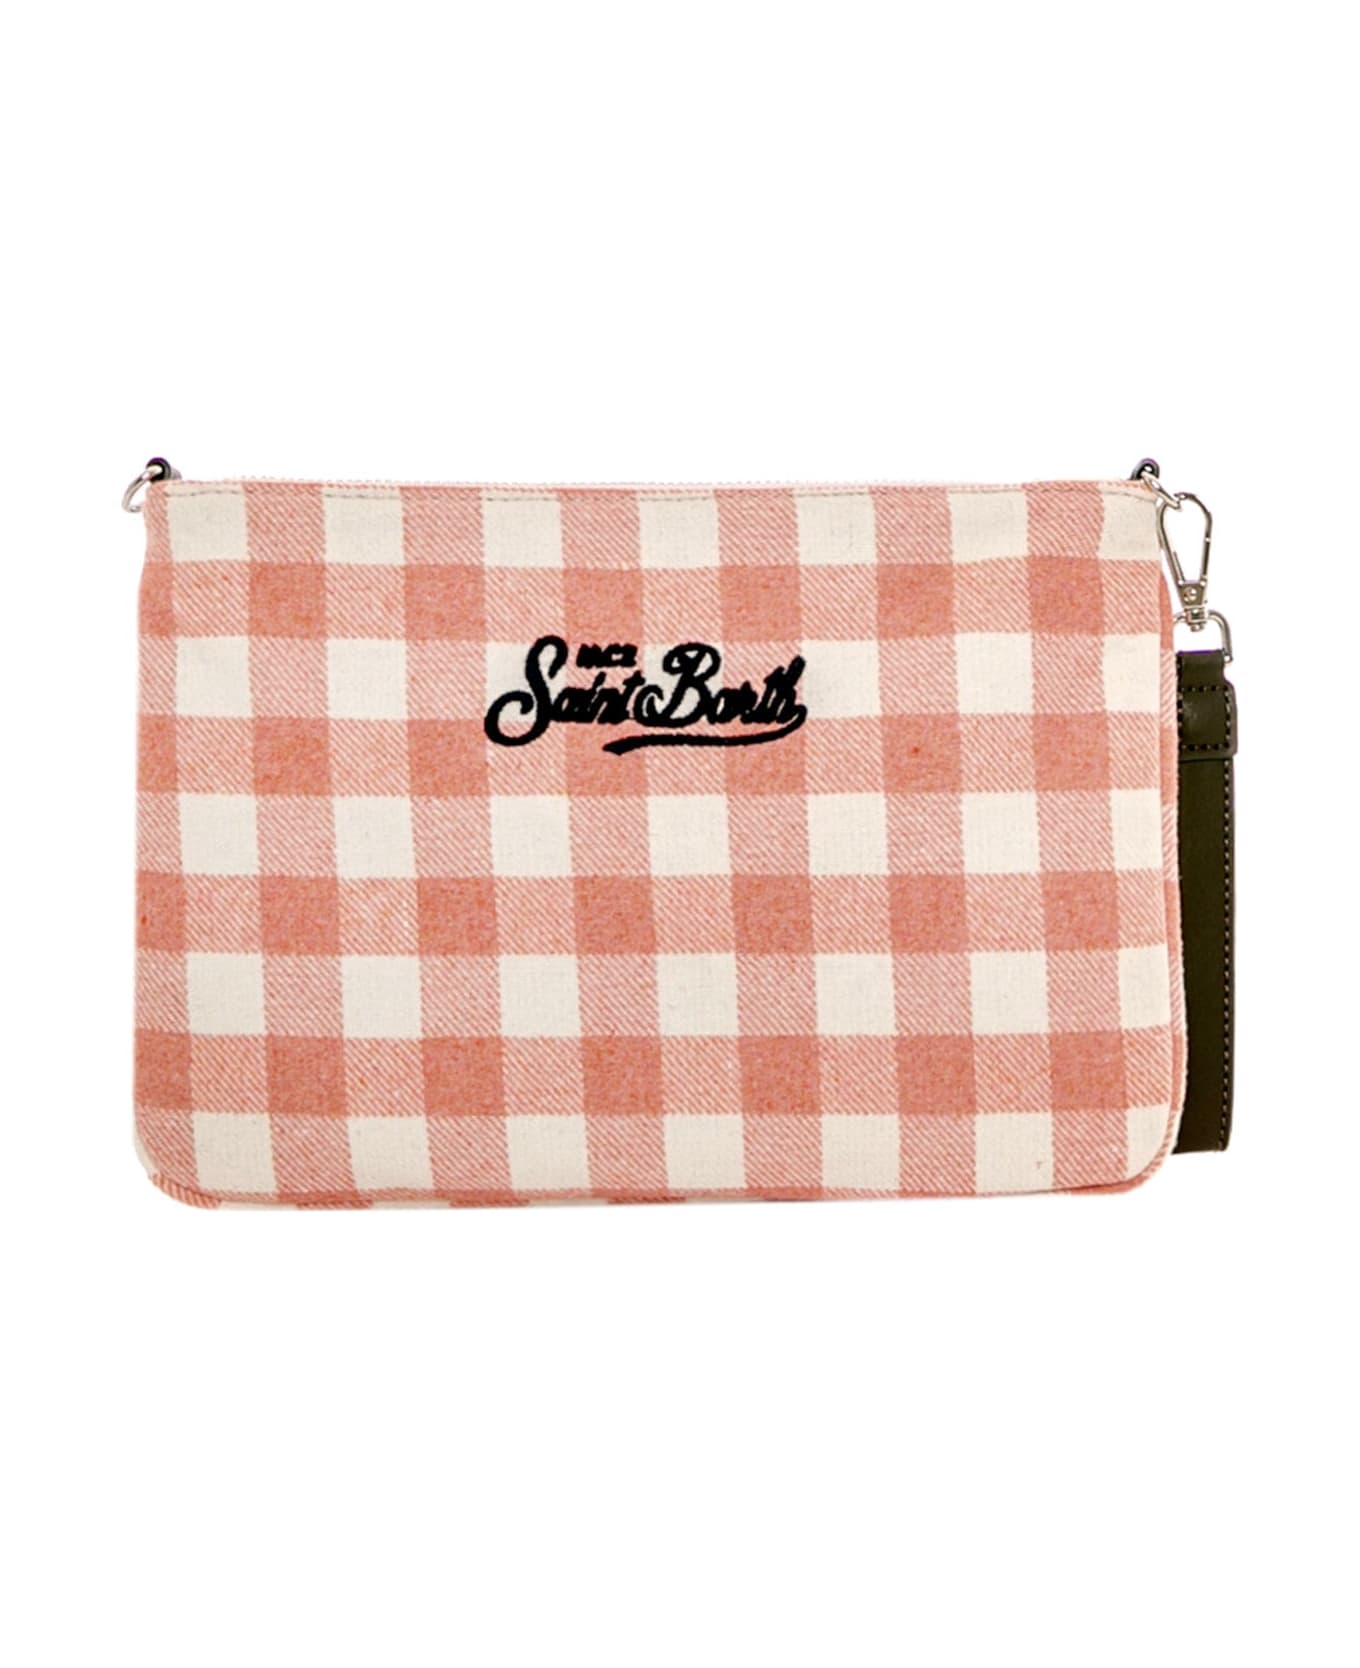 MC2 Saint Barth Parisienne Pink Gingham Wooly Cross-body Pouch Bag - PINK